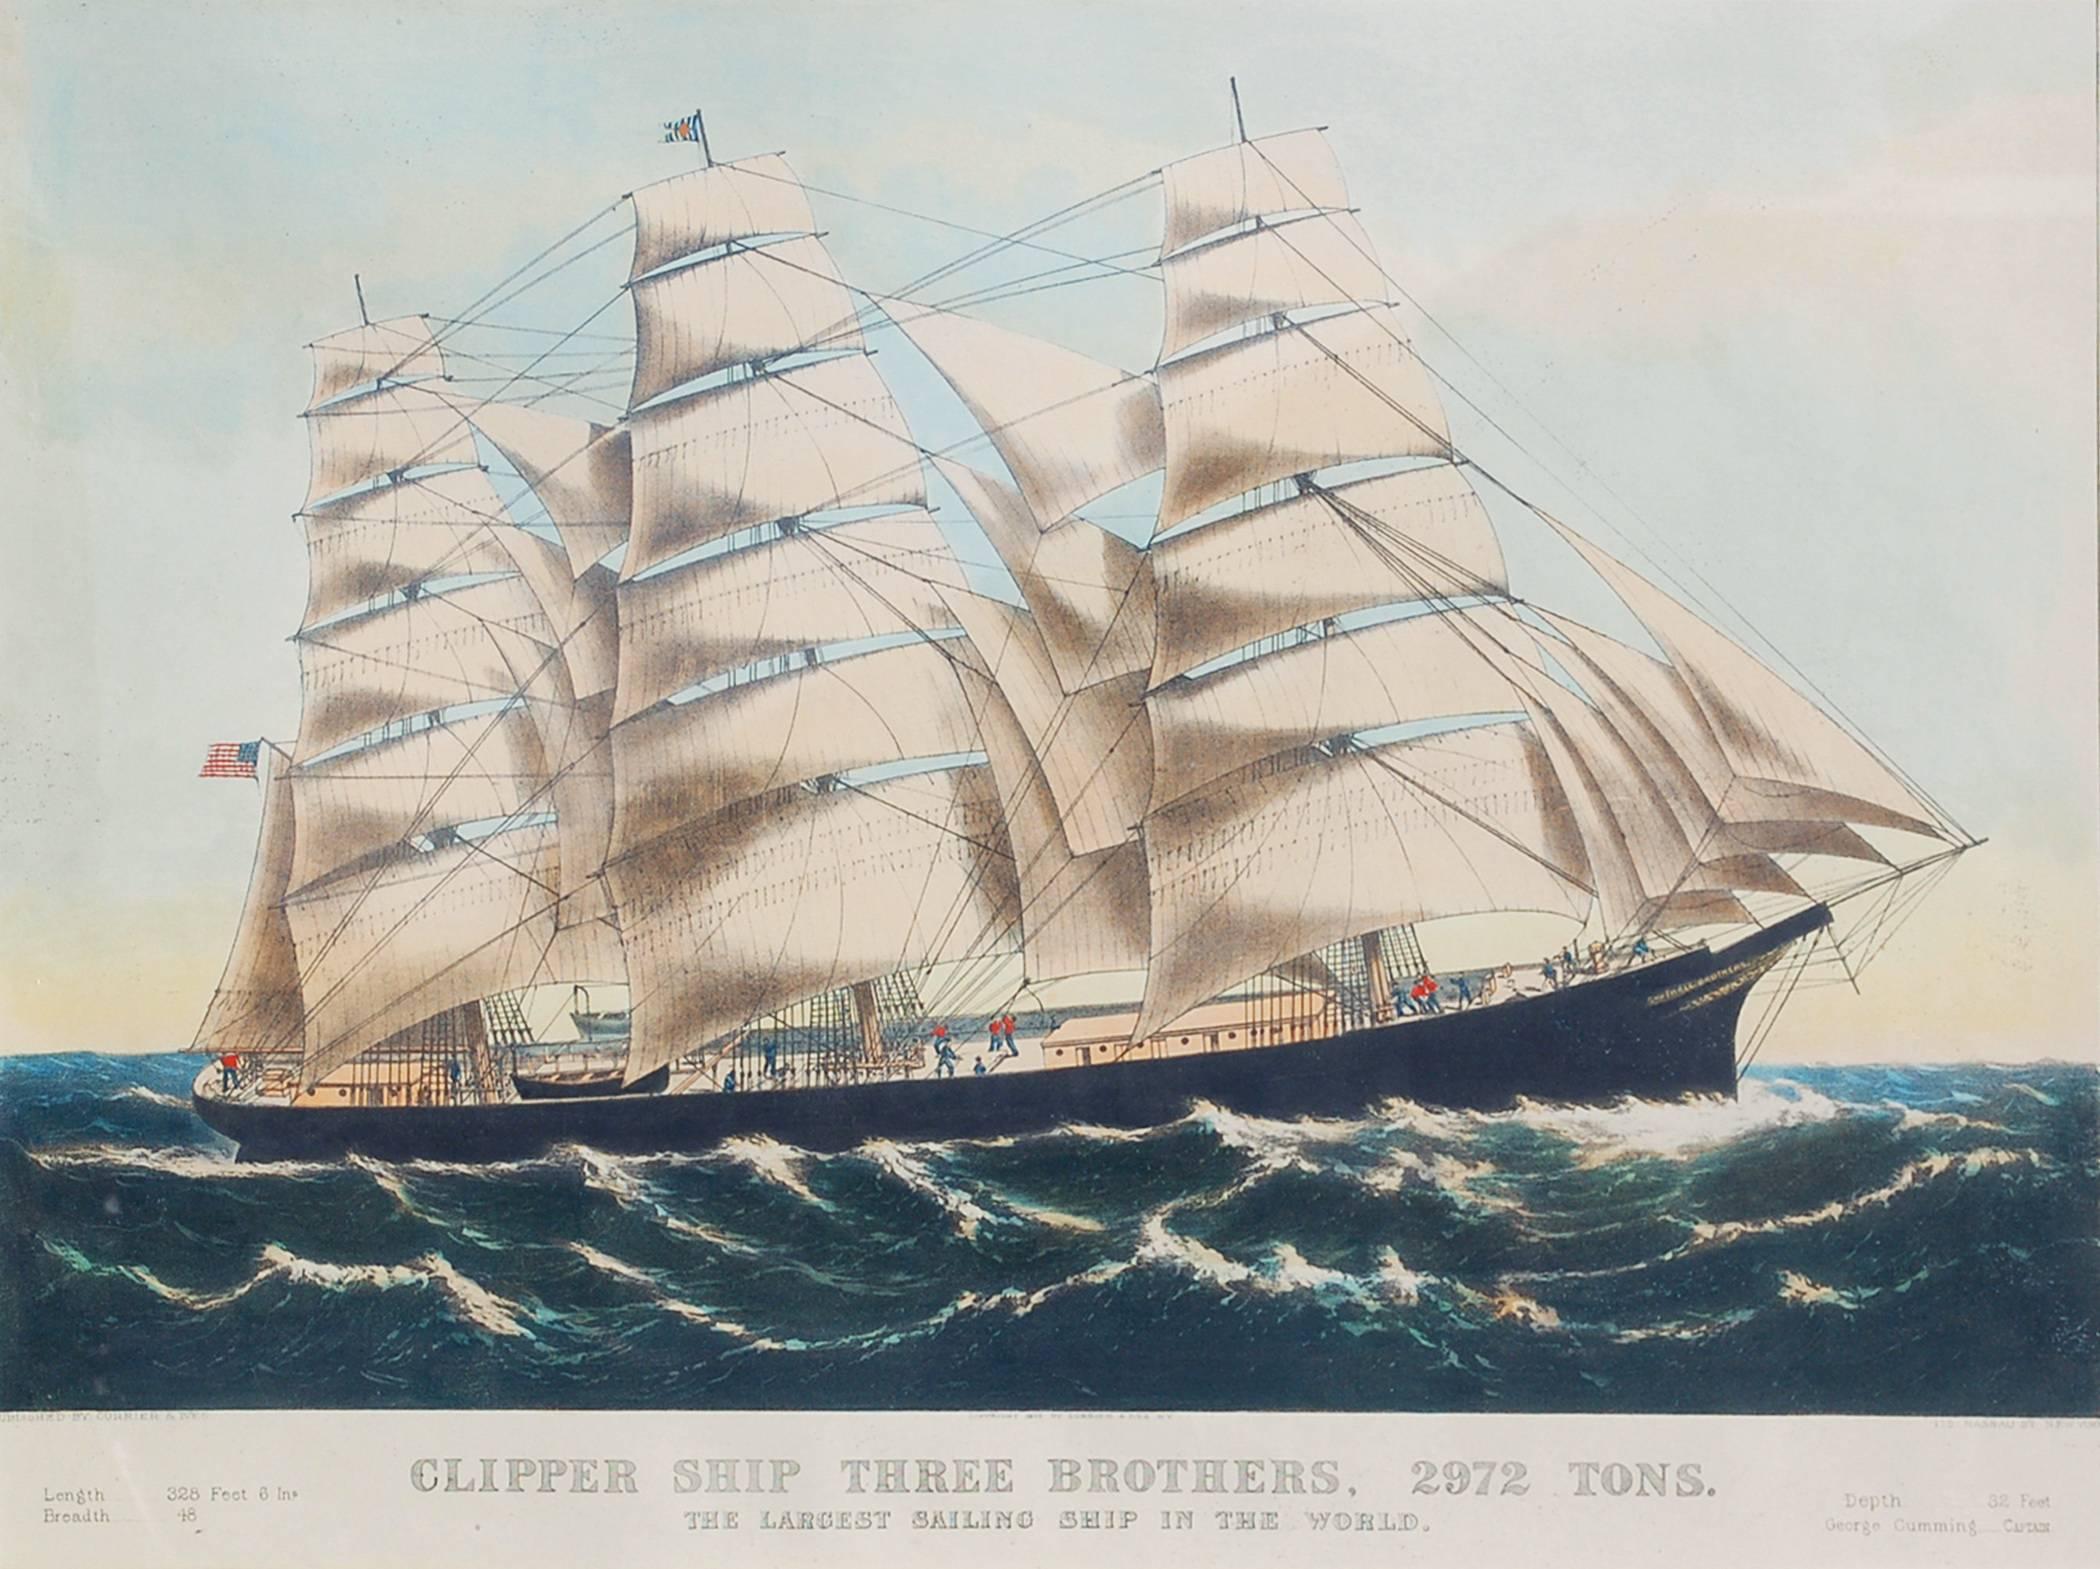 Currier & Ives Print - Clipper Ship THREE BROTHERS, 2972 tons. The Largest Sailing Ship in the World.